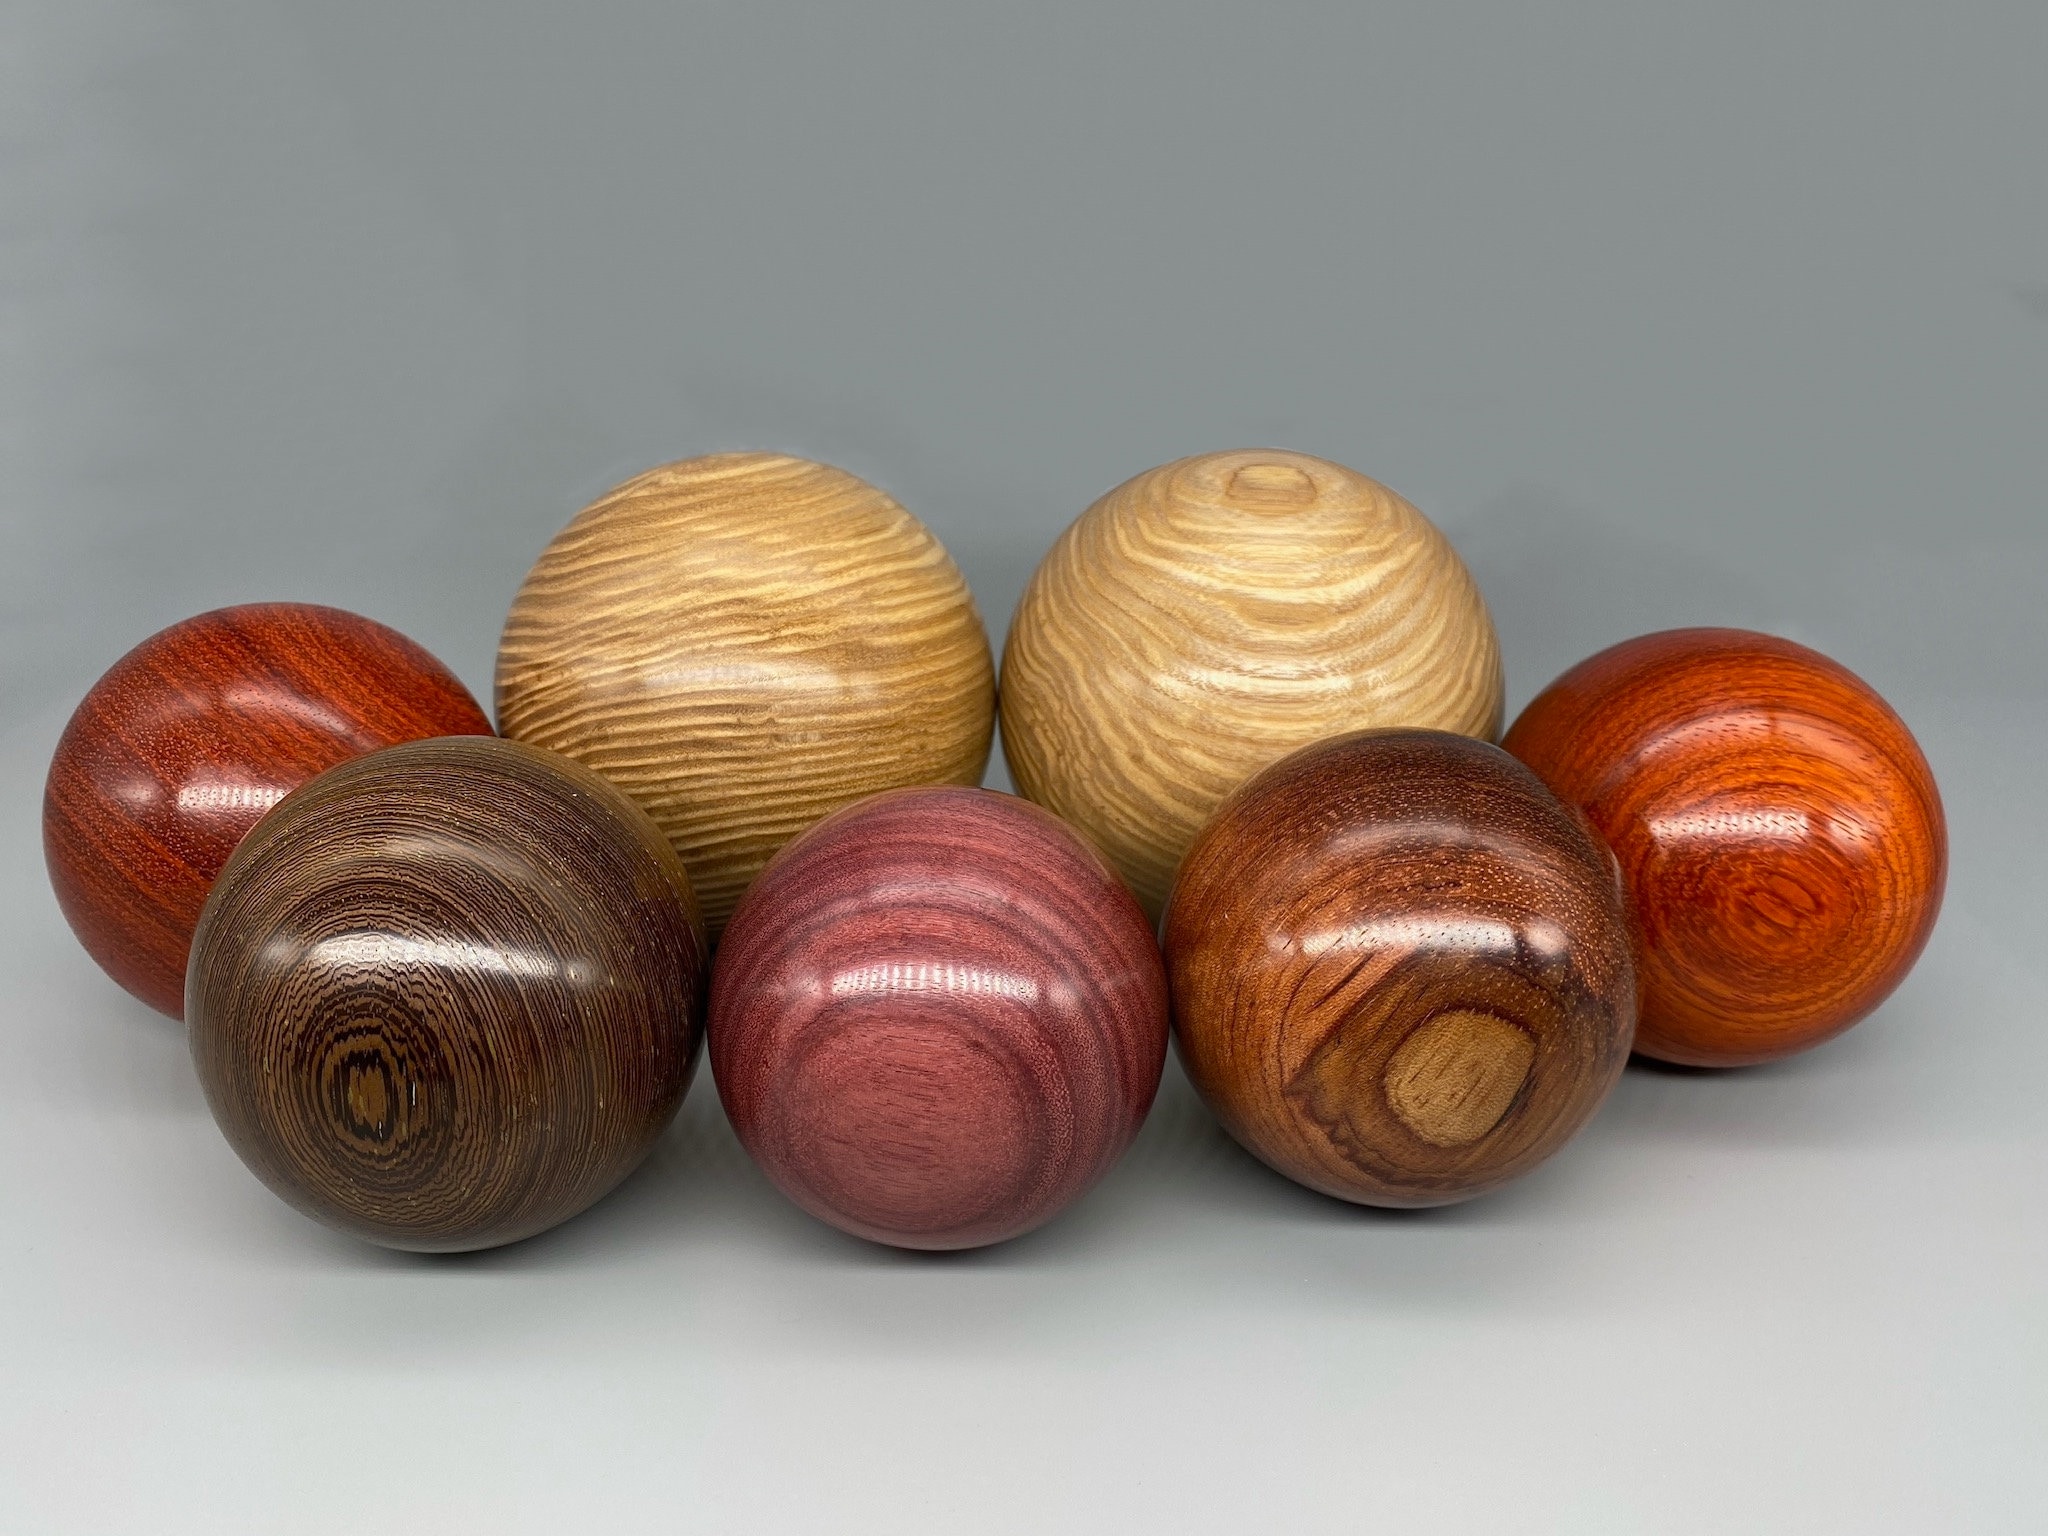 Set of Four Wooden Balls, Made From Hardwood, 90mm / 9cm / 3.5